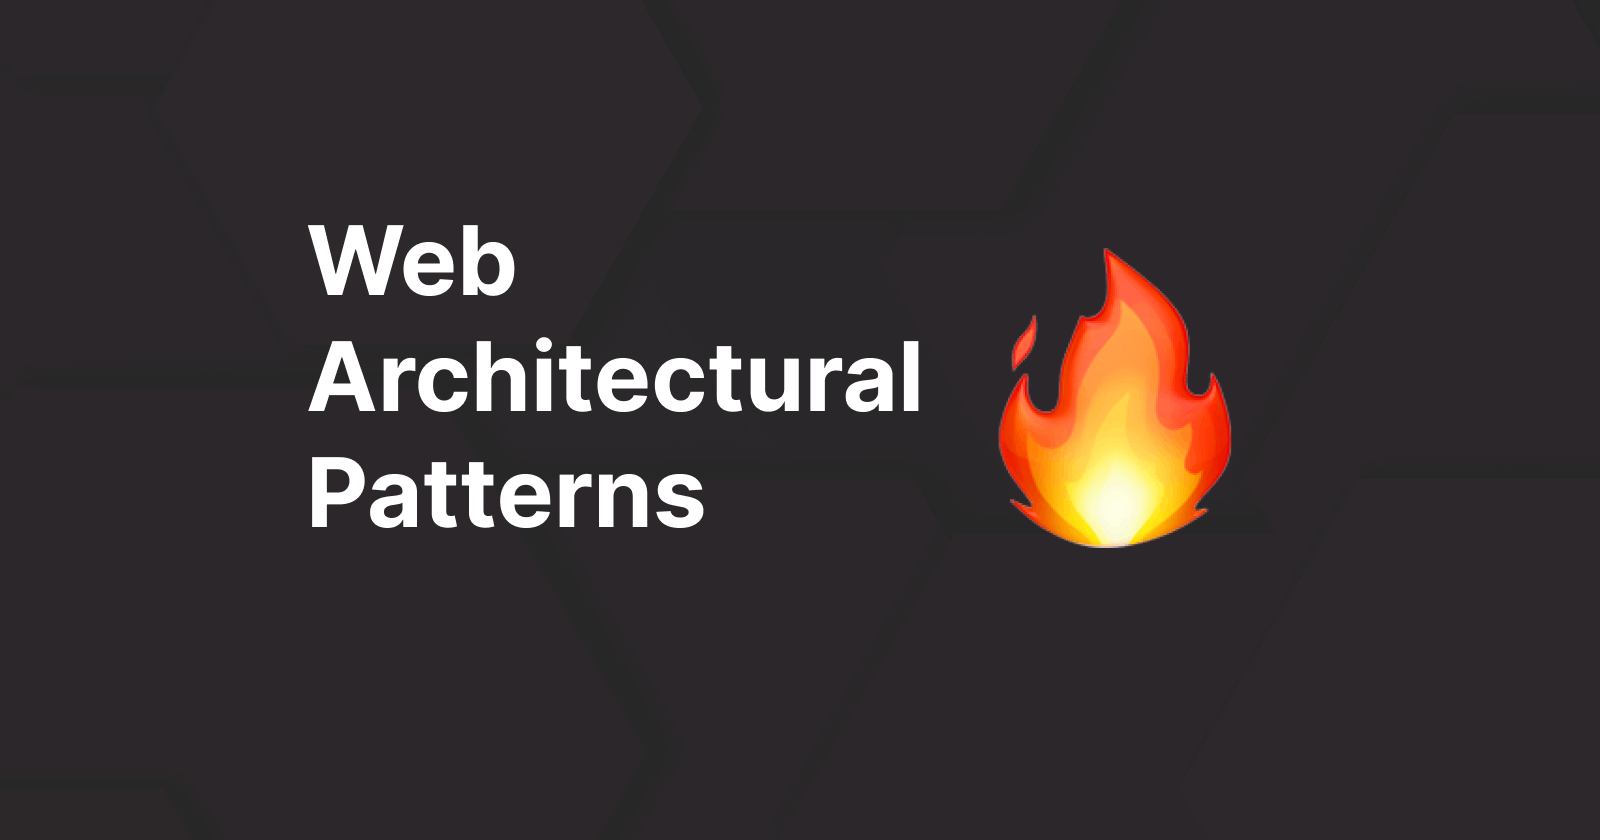 Web Architectural Patterns : An Overview